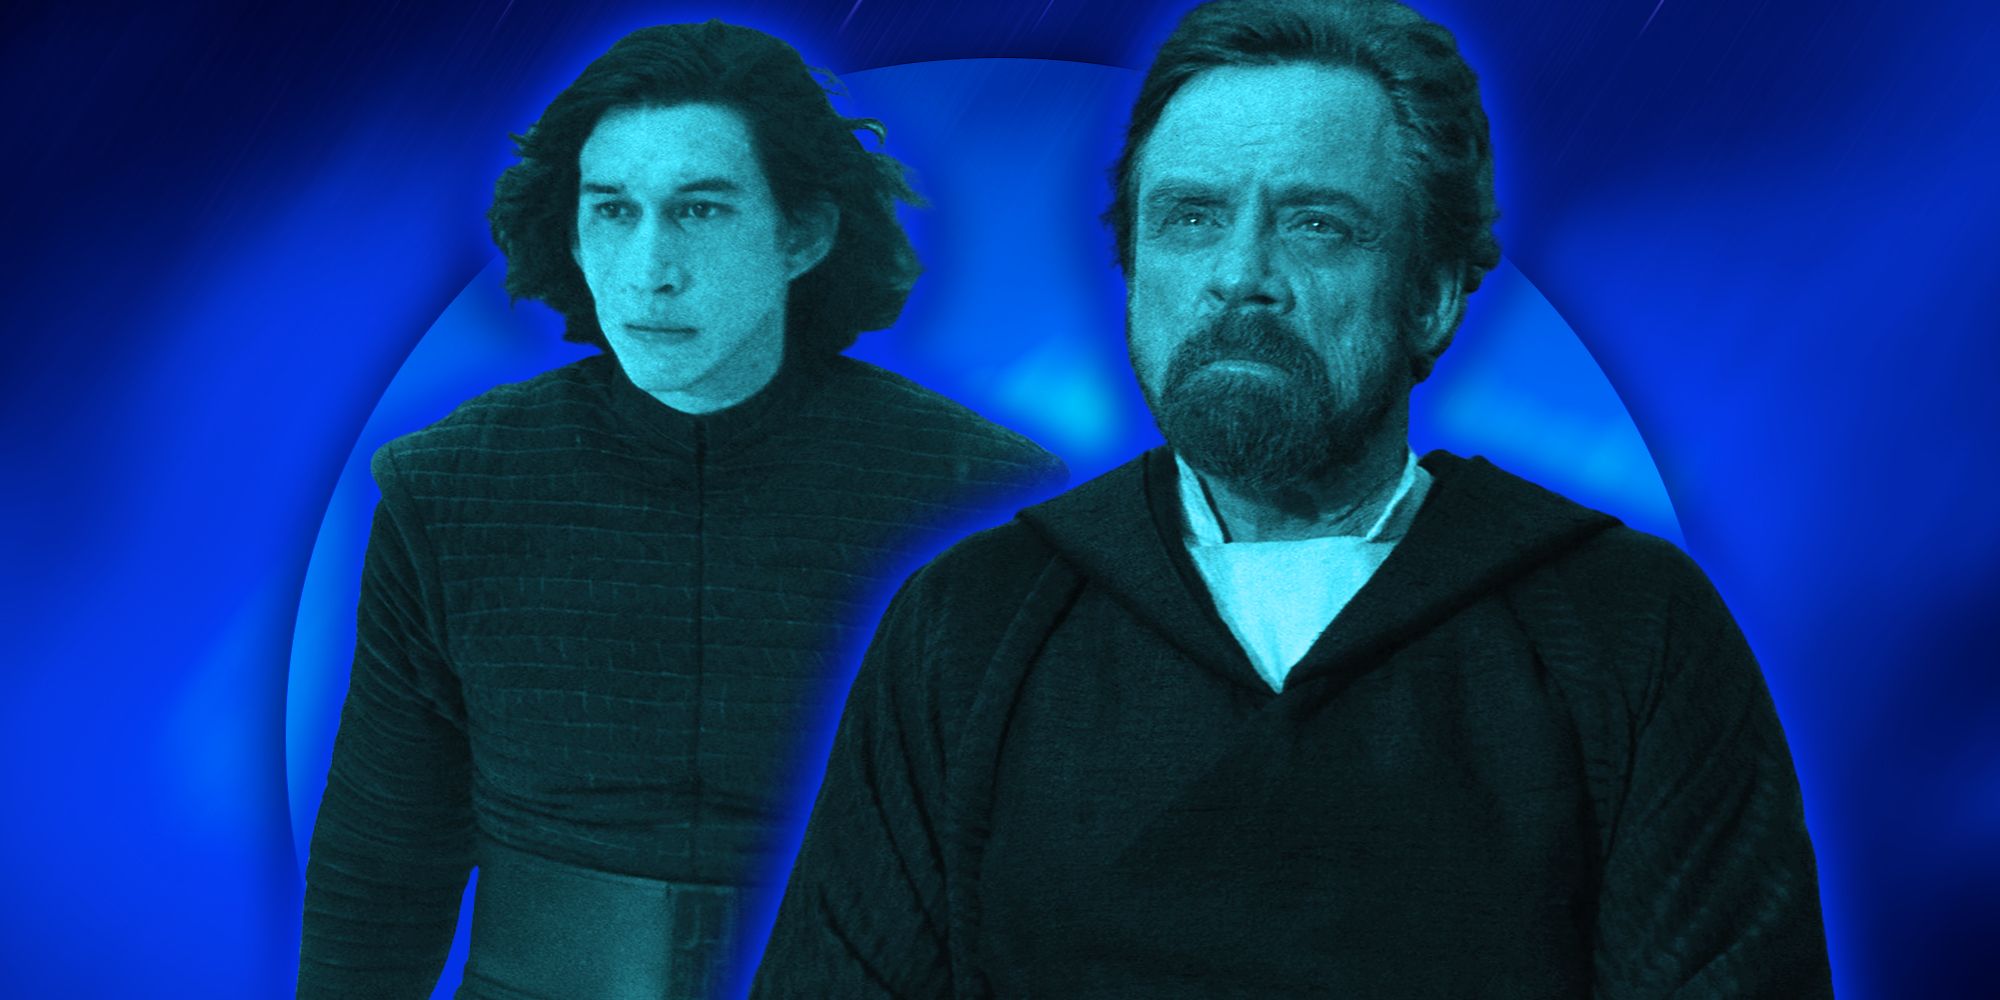 Kylo Ren and Luke Skywalker face each other at the end of The Last Jedi, edited in cyan over a blue background